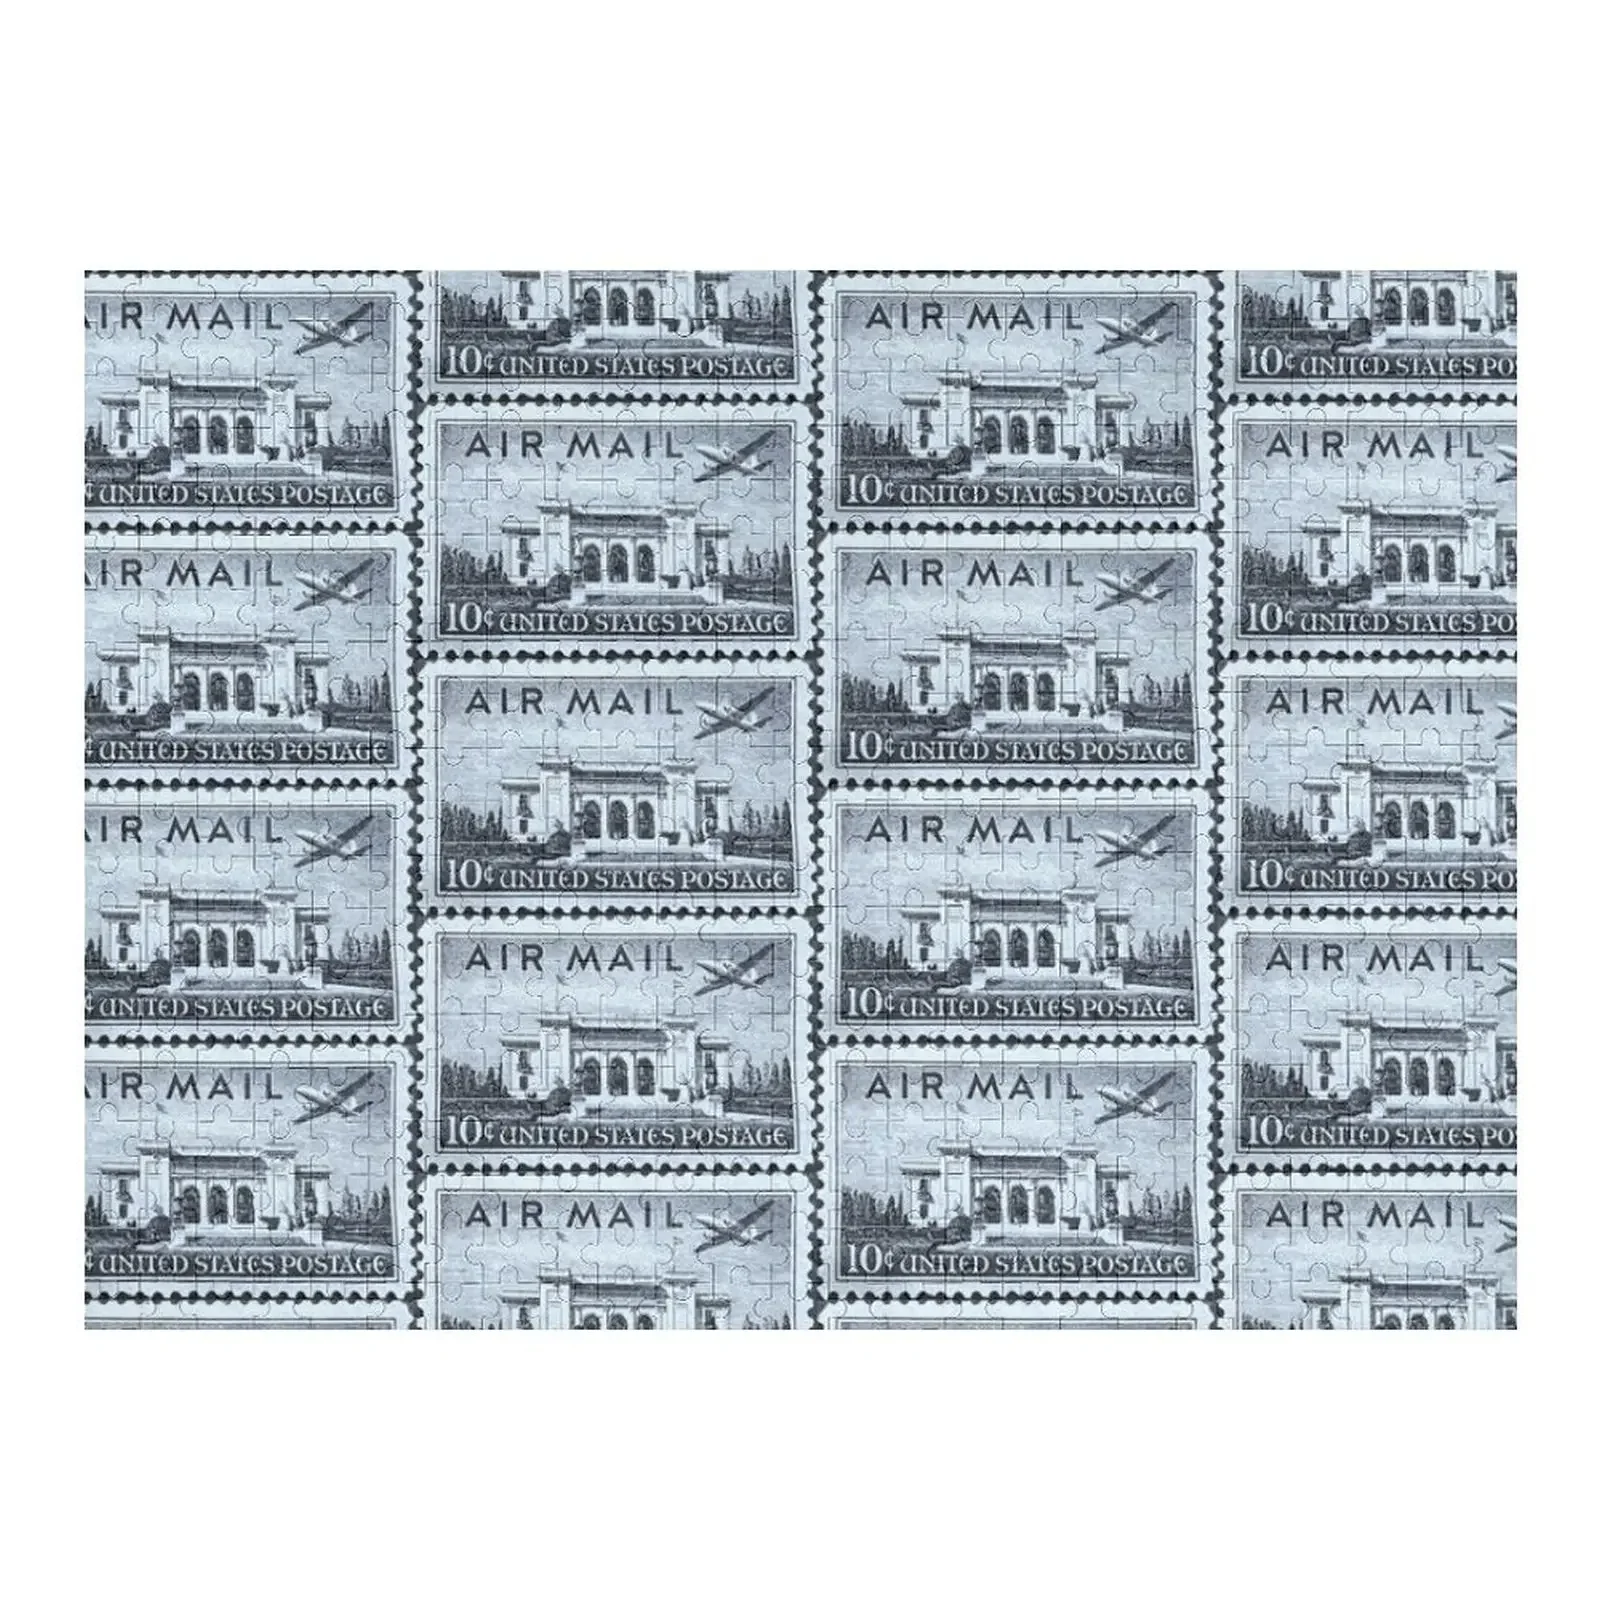 Pan American Building Air Mail Vintage Postage Stamp Jigsaw Puzzle Photo Iq Jigsaw Custom Works Of Art Puzzle pan american building air mail vintage postage stamp jigsaw puzzle photo iq jigsaw custom works of art puzzle